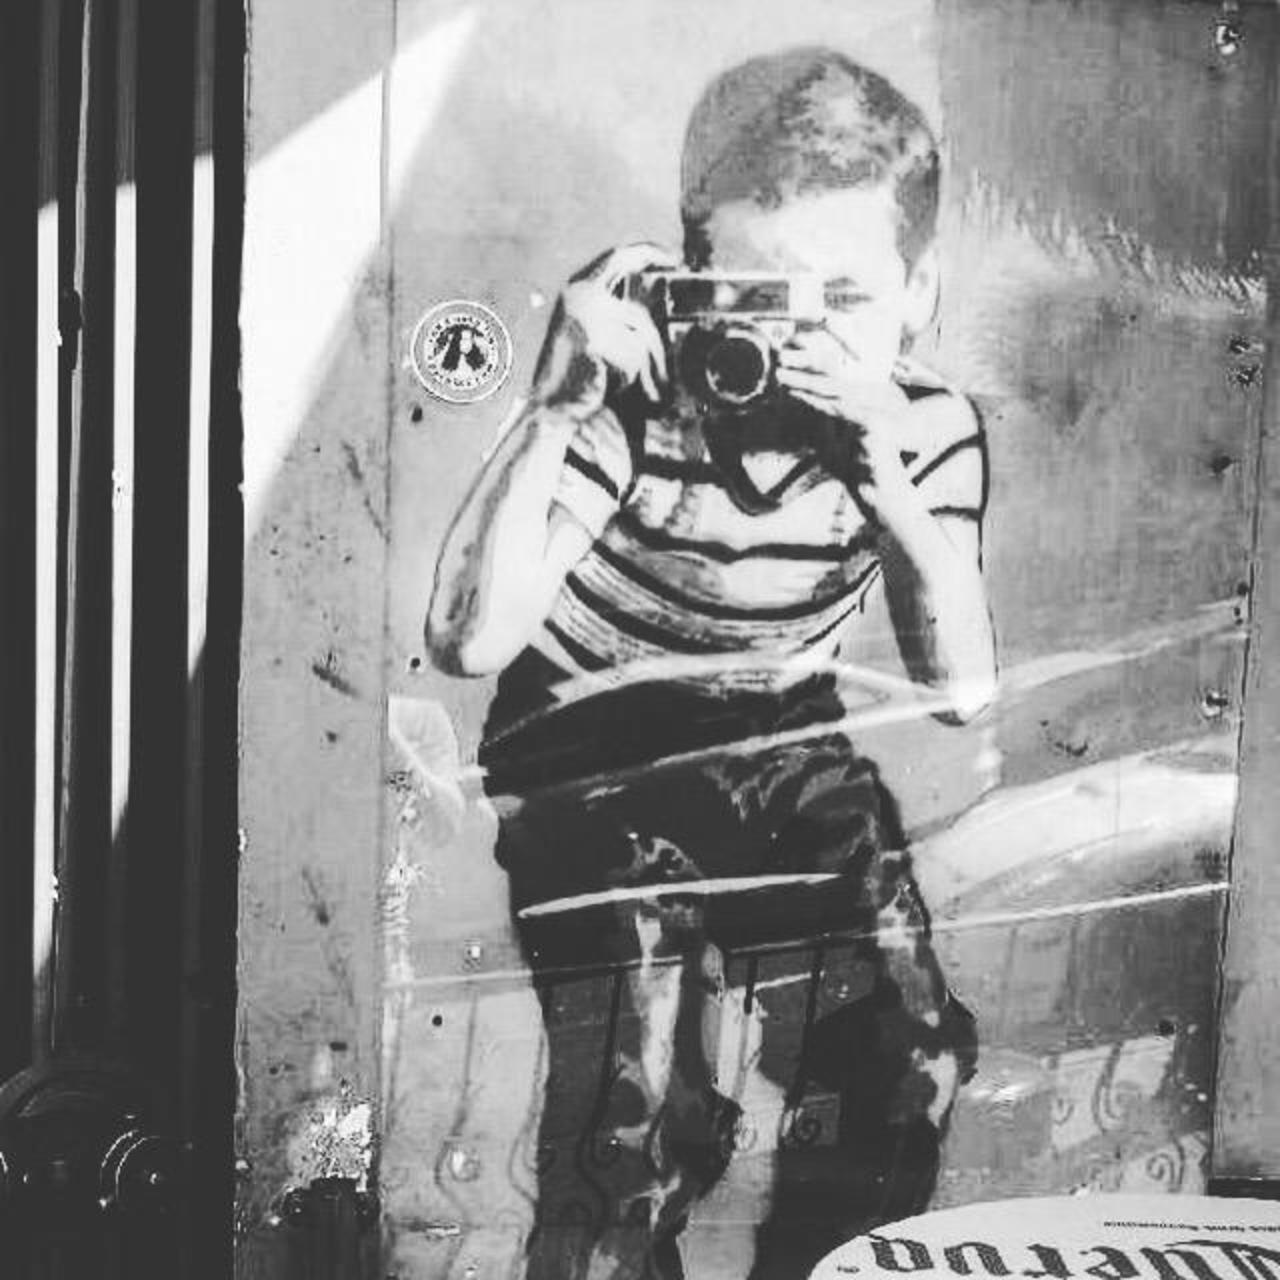 RT @freelatour: Seems there r #Banksy's all over #LosAngeles. Saw this one taking my photo in #Hollywood. #Art #Mural #graffiti #LA http://t.co/XN8f1F2diN